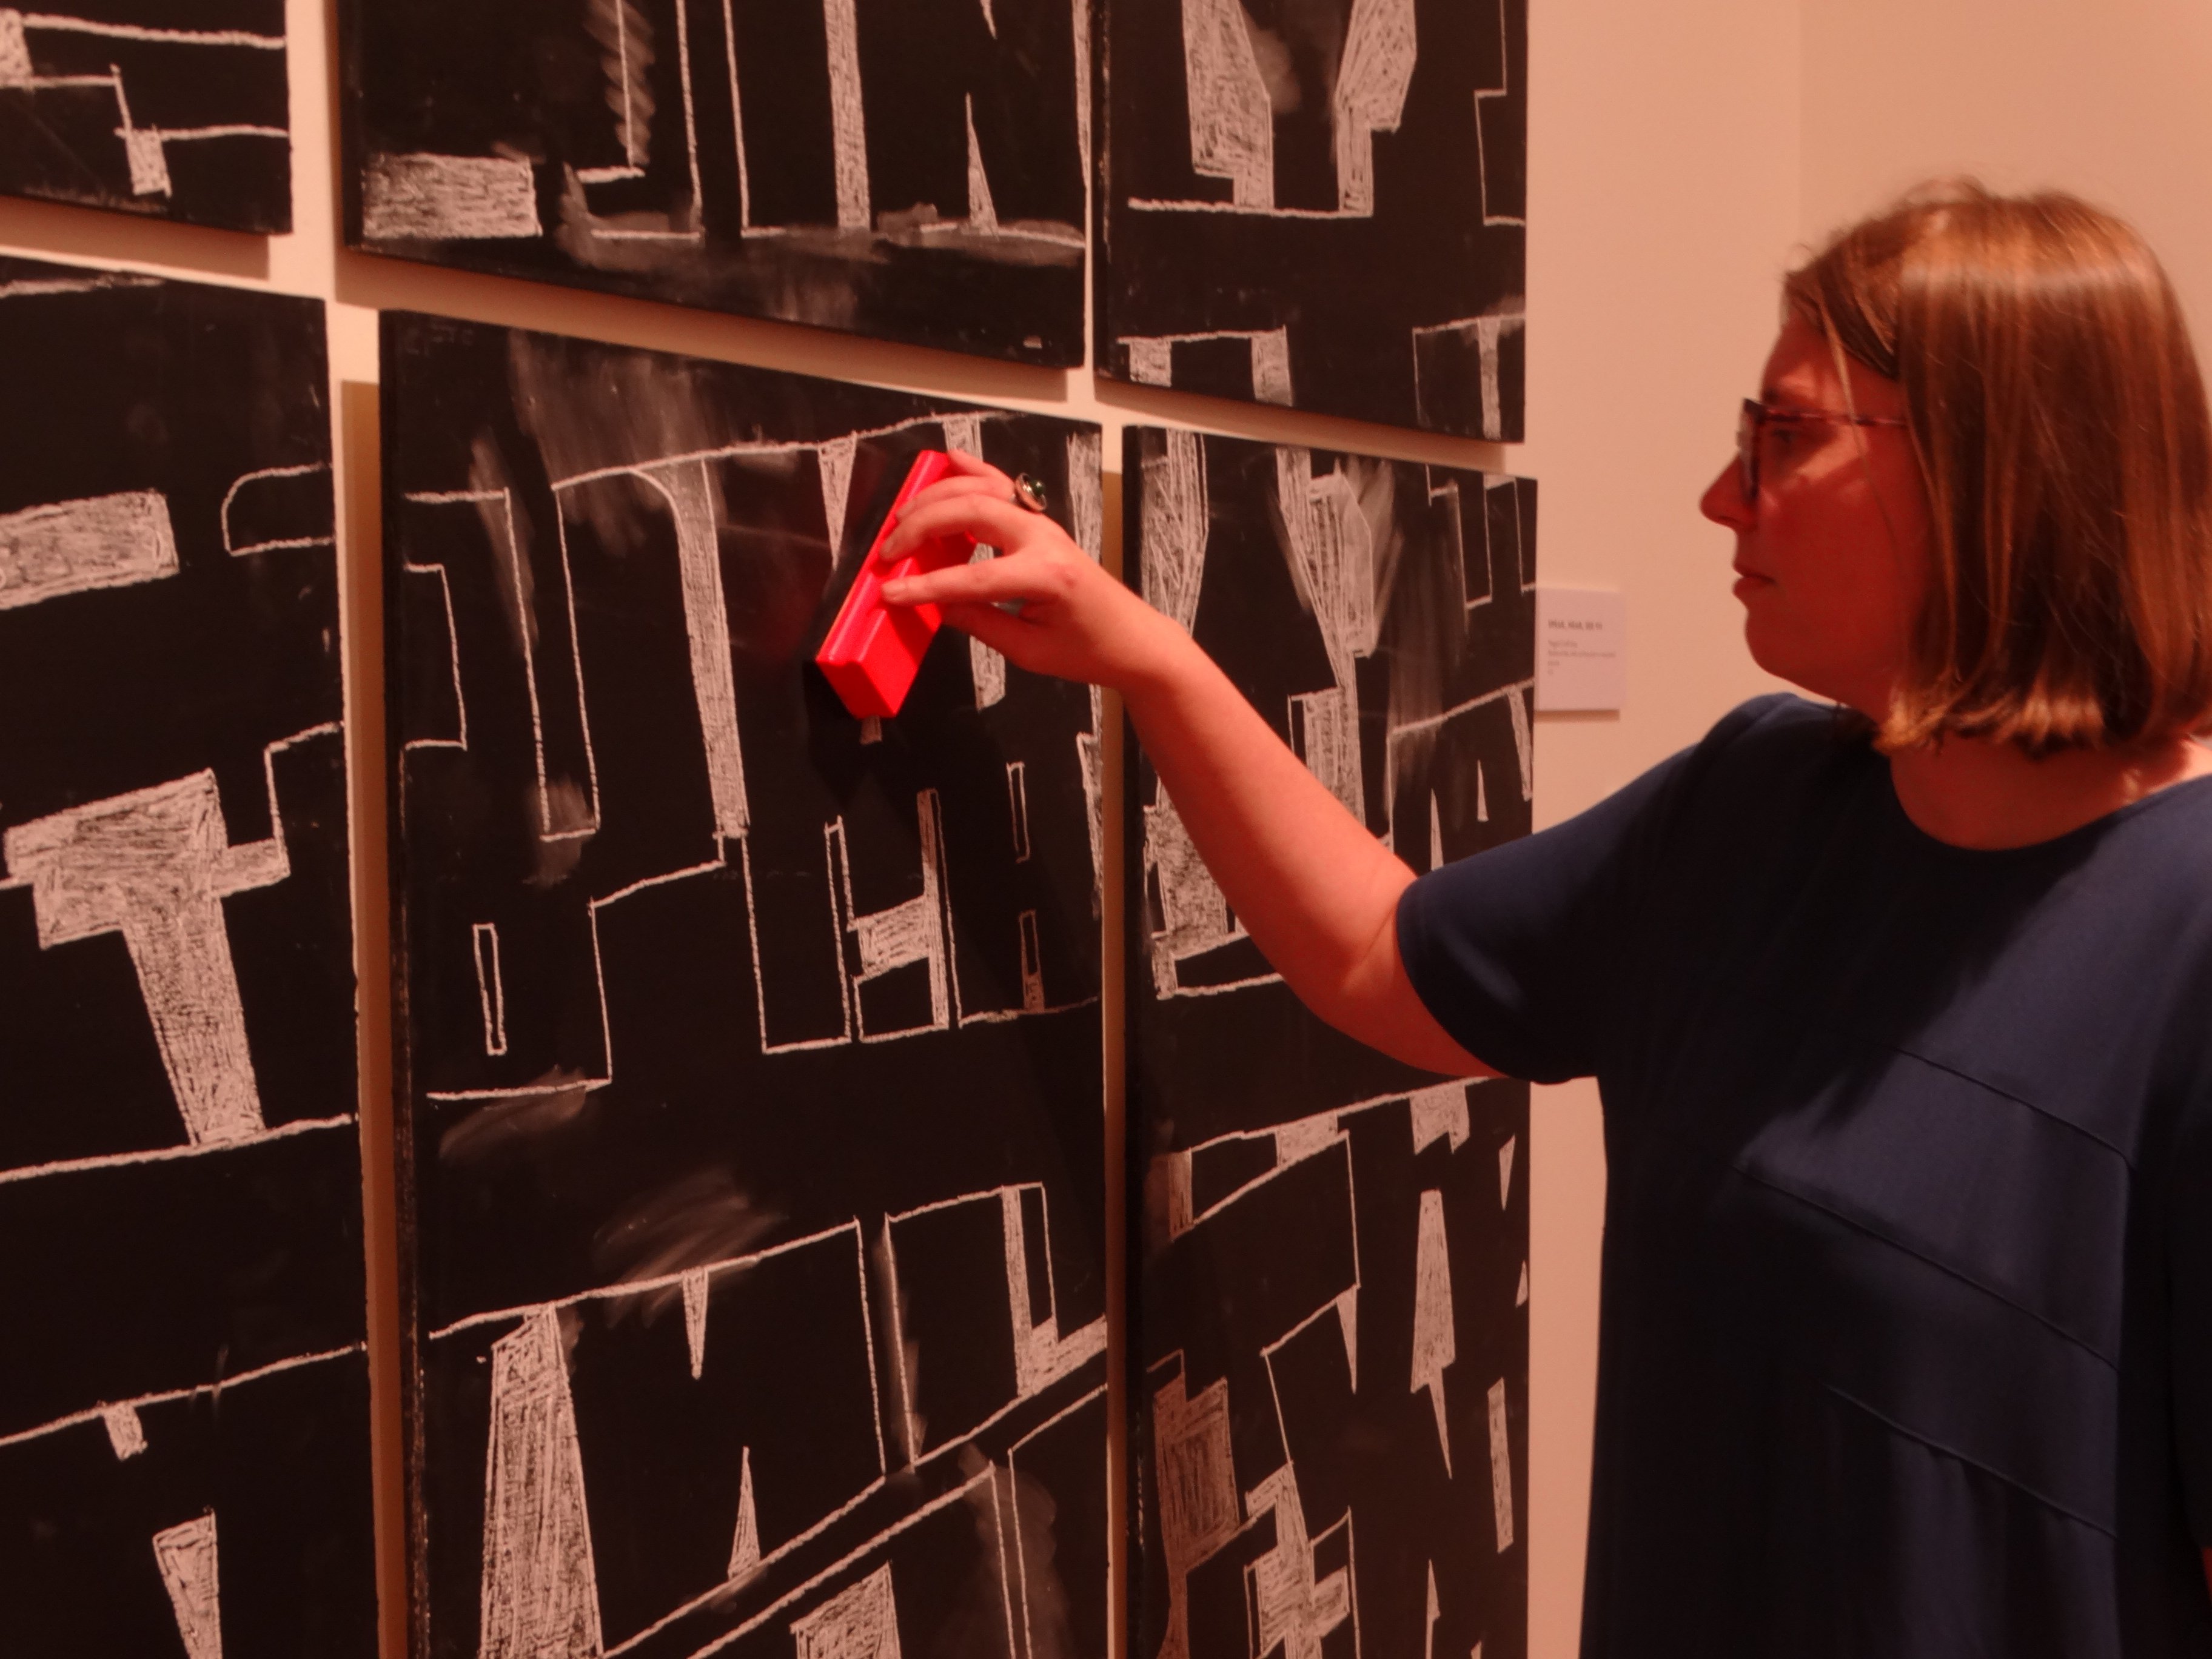 Forrester Gallery director Chloe Searle has a go at erasing artwork from a chalkboard that is...